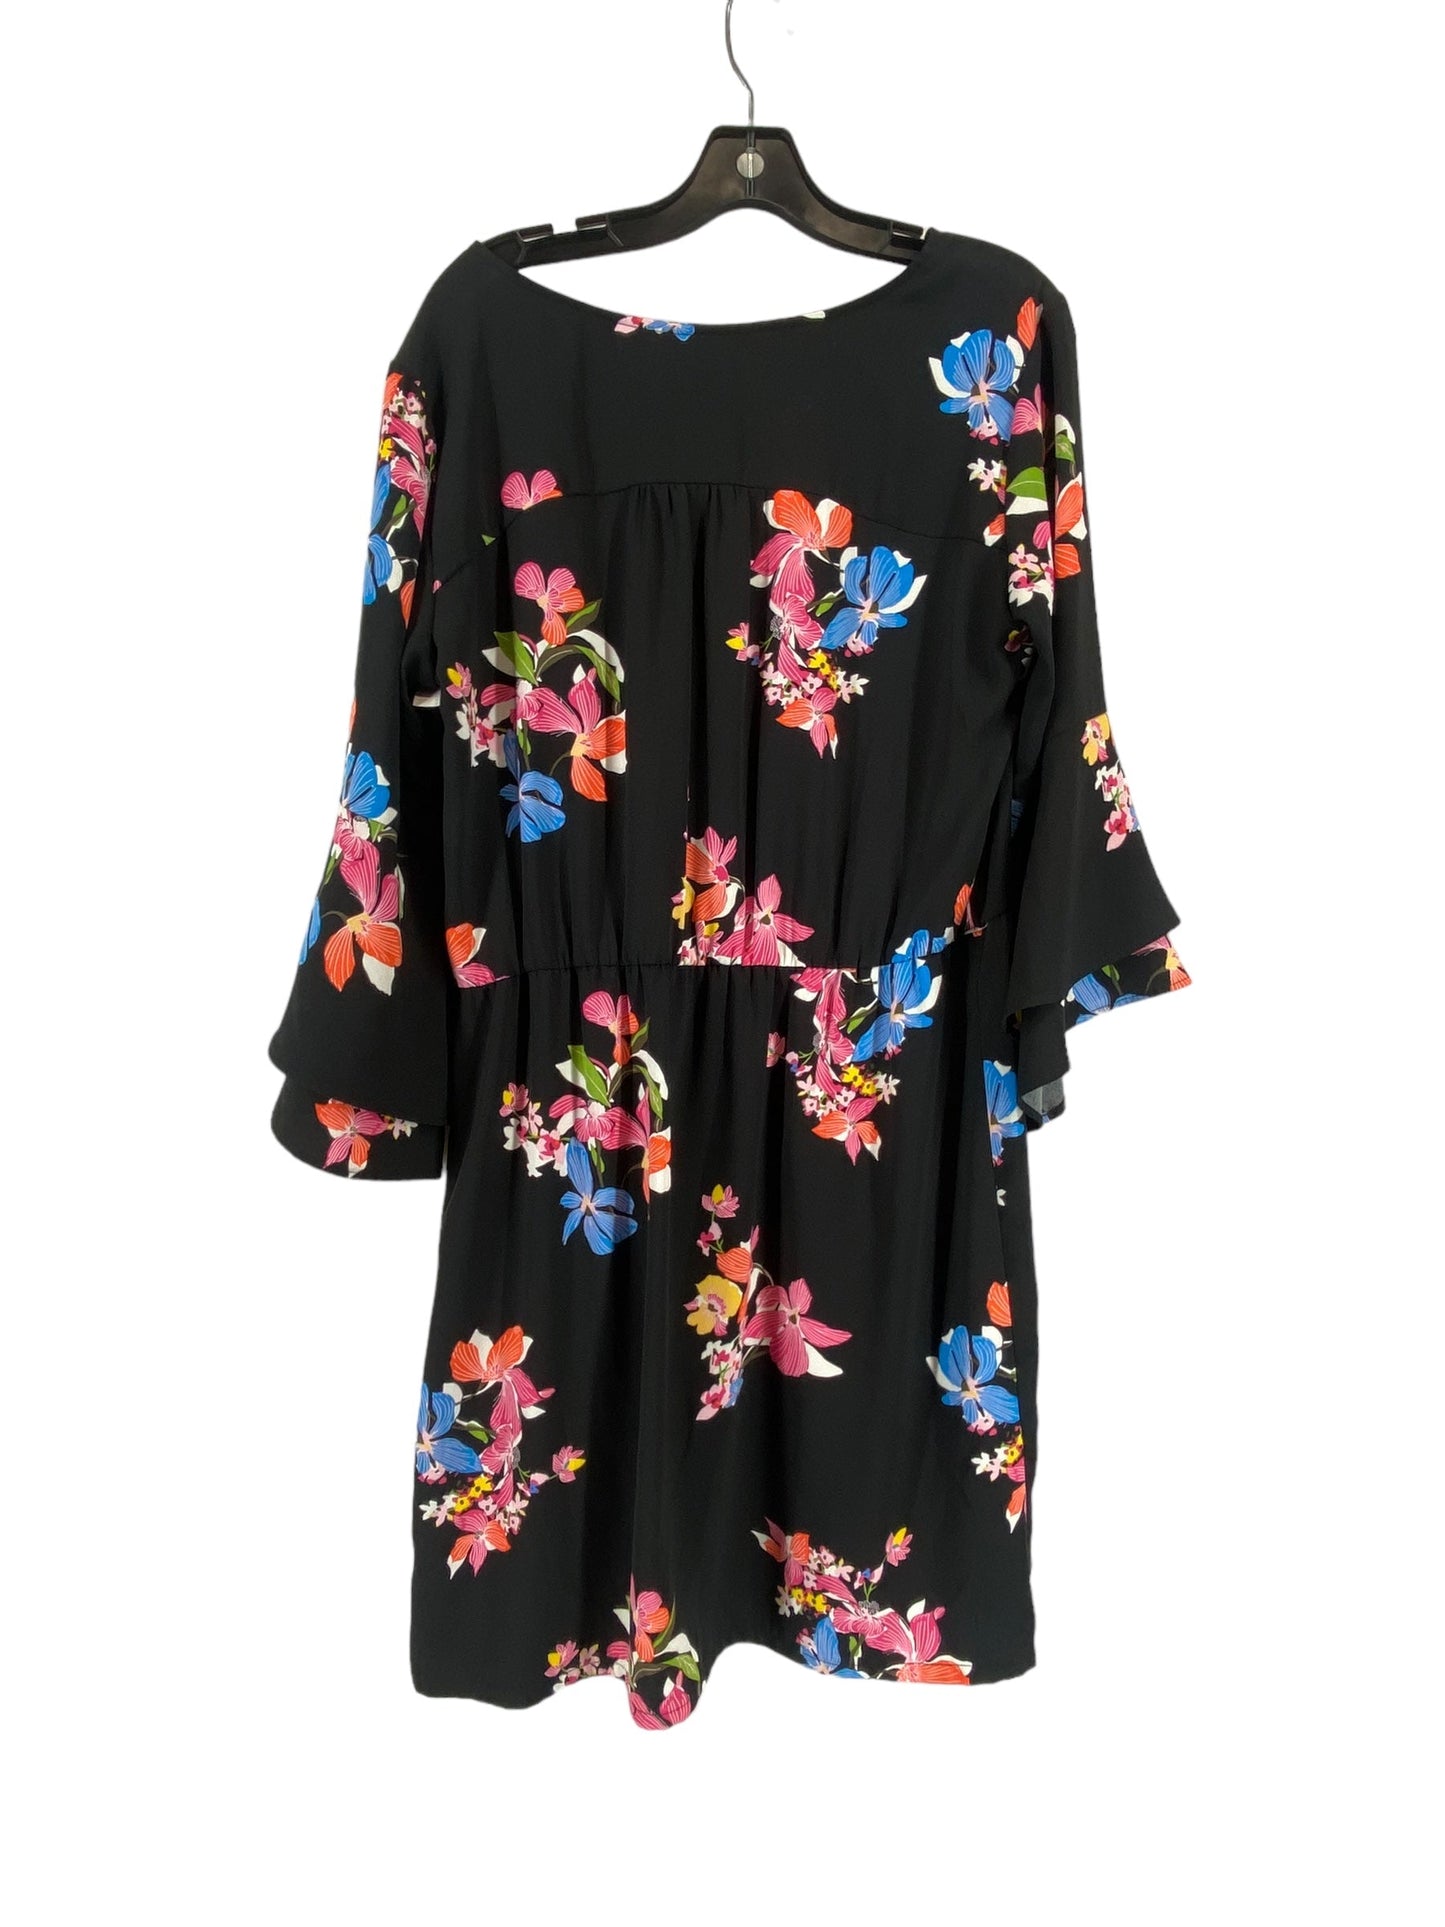 Floral Print Dress Casual Midi A New Day, Size Xl